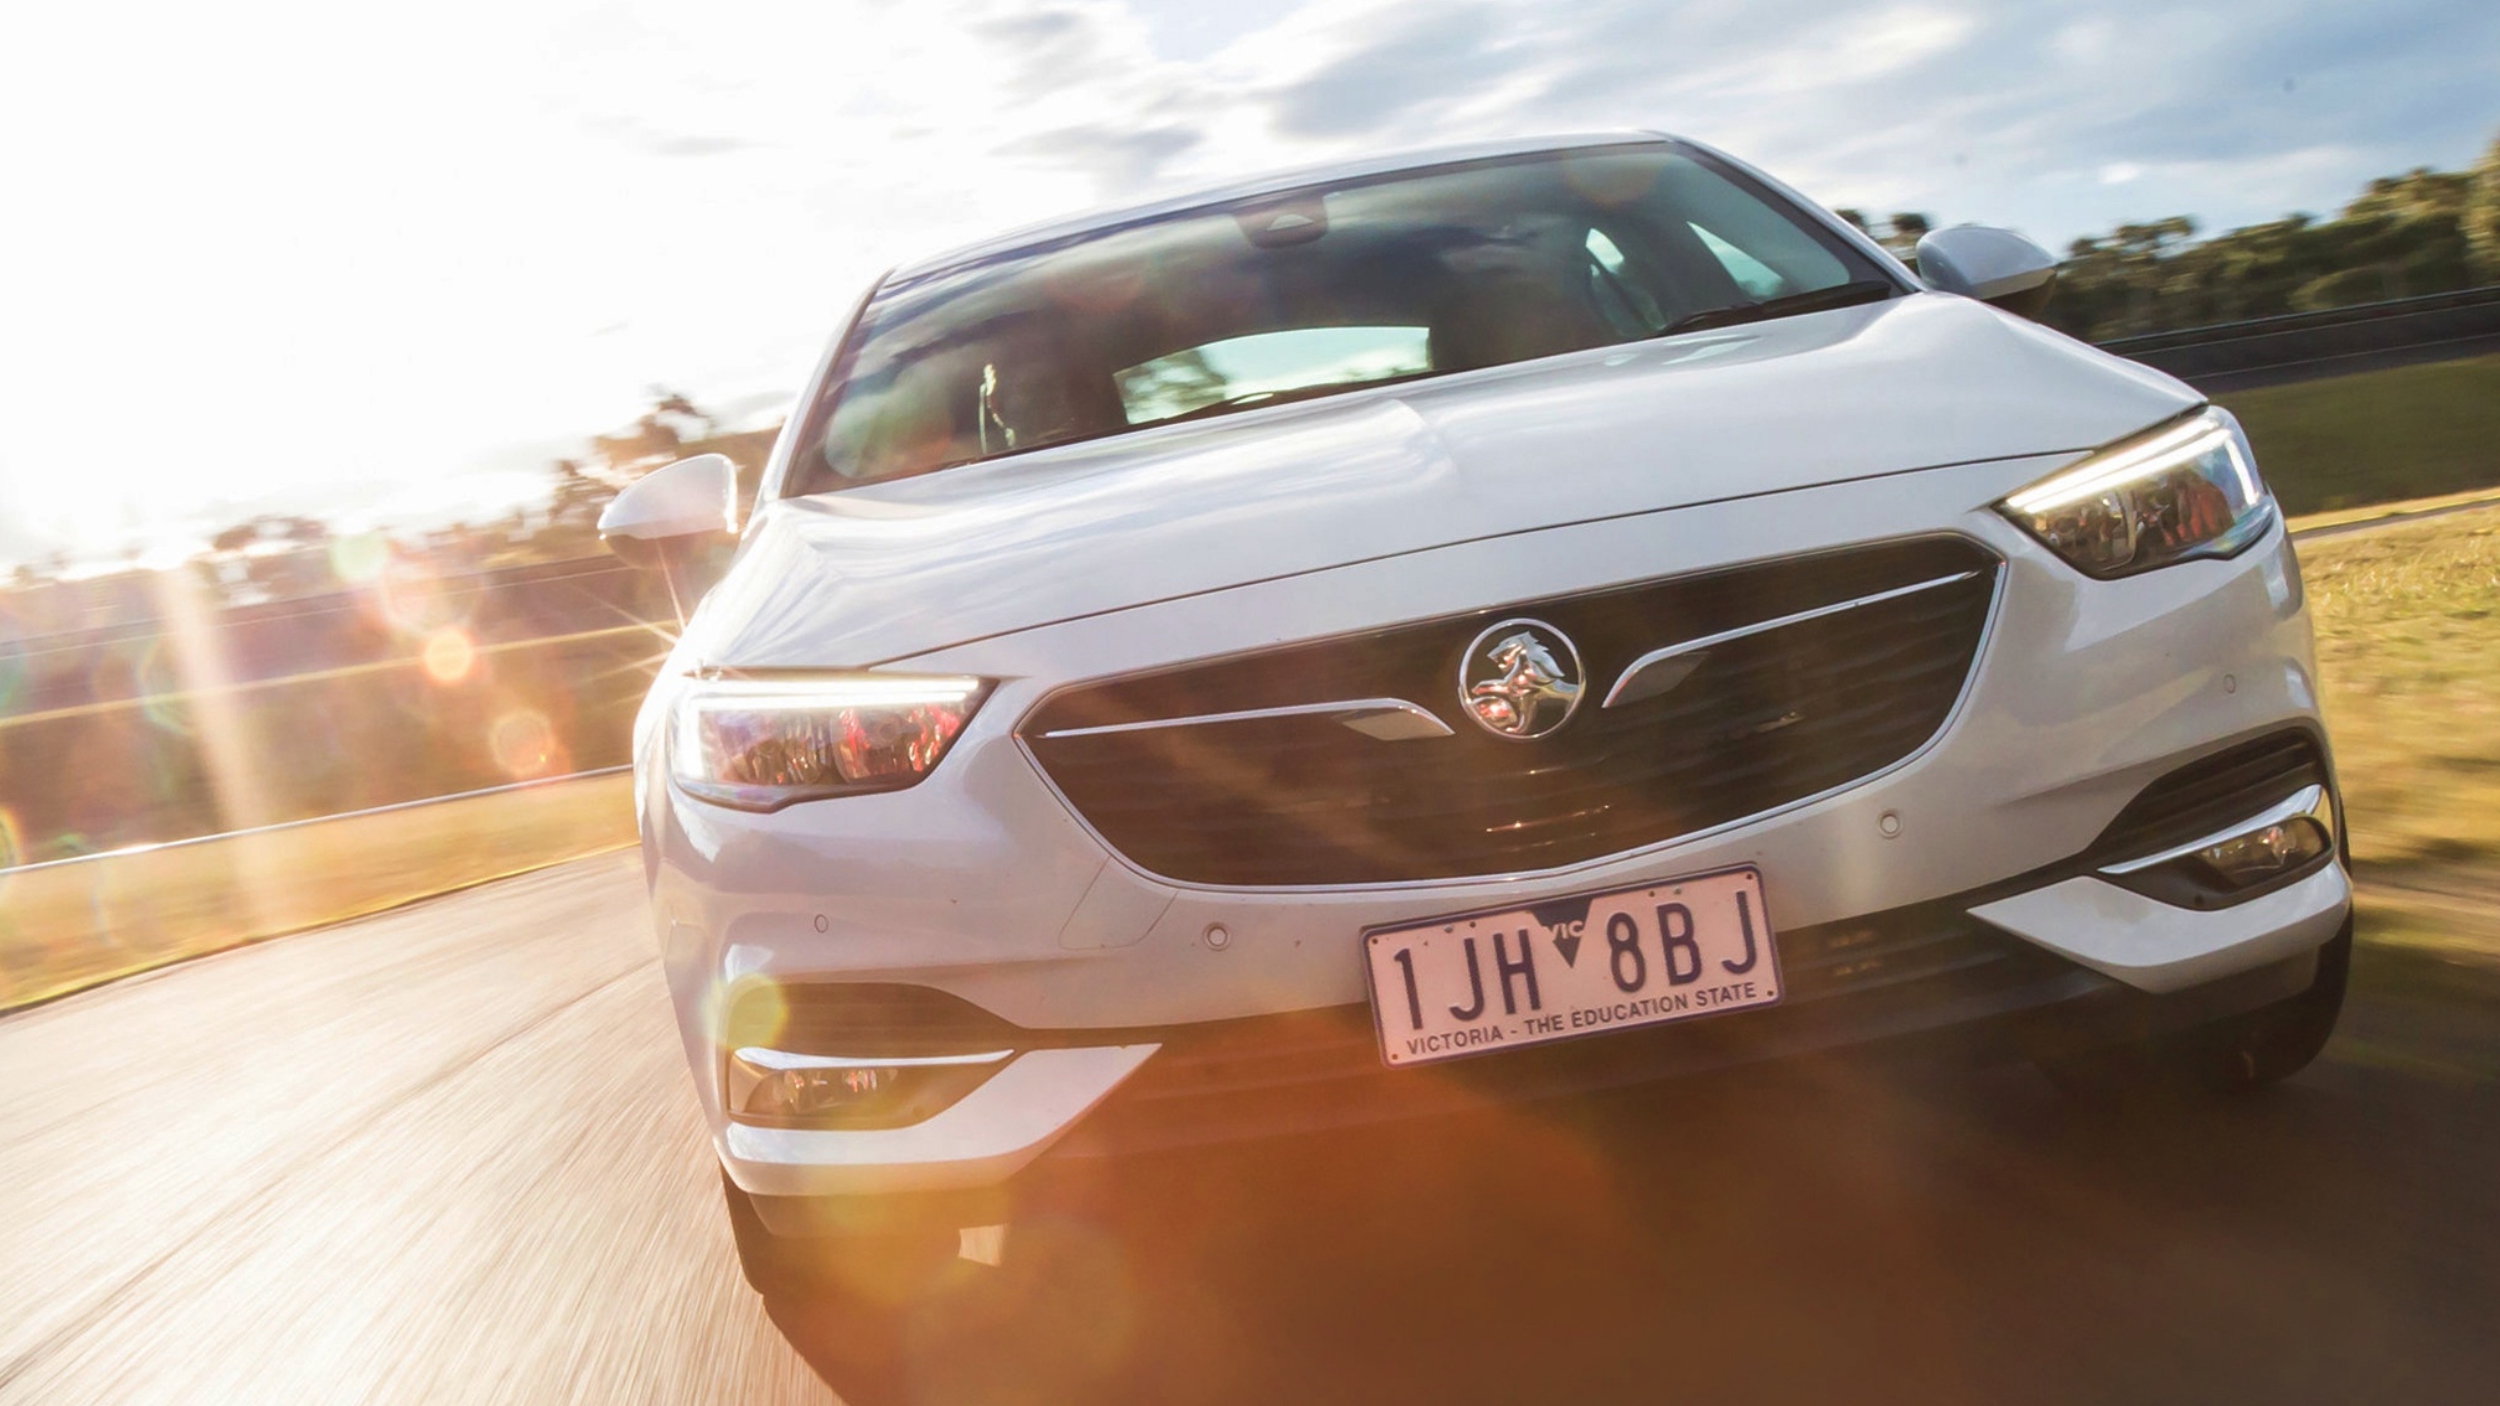 News BatteryElectric Holden Commodore Could Be Real By 2025